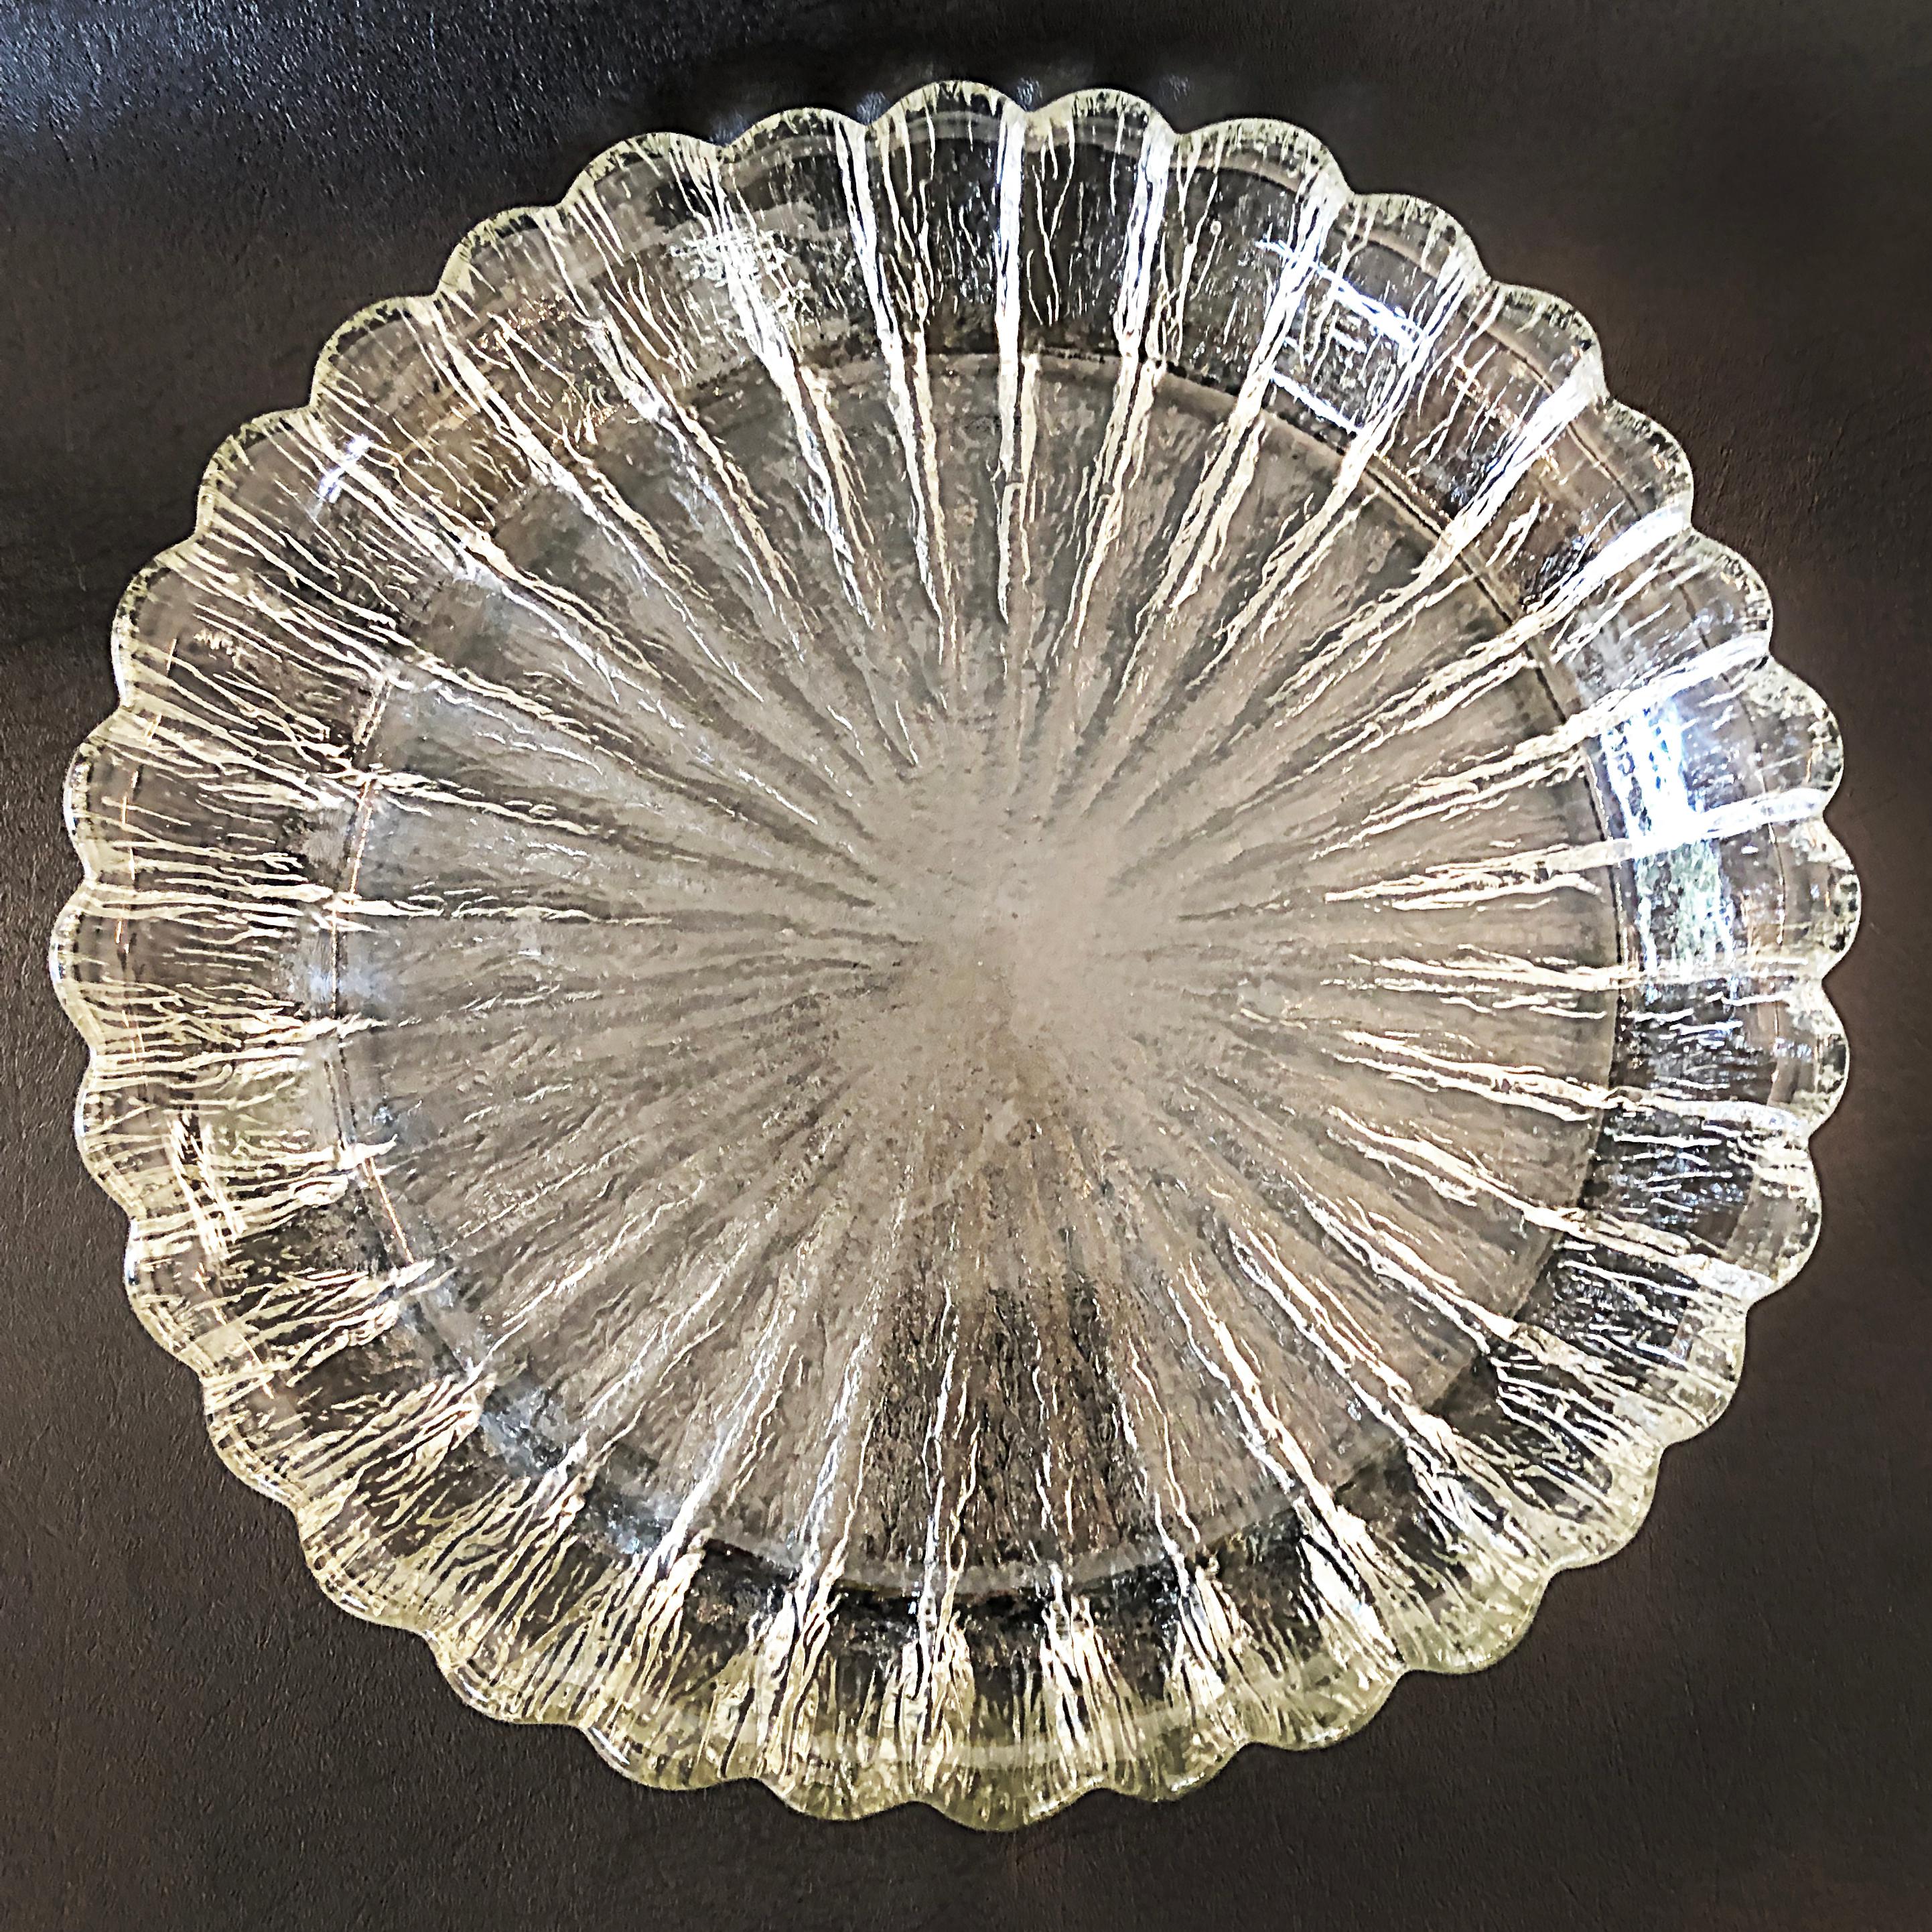 Danish Modern Lead Crystal Centerpiece Bowl By Sidse Werner for Holmegaard Glass.

Offered for sale is a Danish modern lead crystal centerpiece bowl by Sidse Werner for Holmegaard Glass, Denmark. This large and heavy centerpiece bowl was confirmed